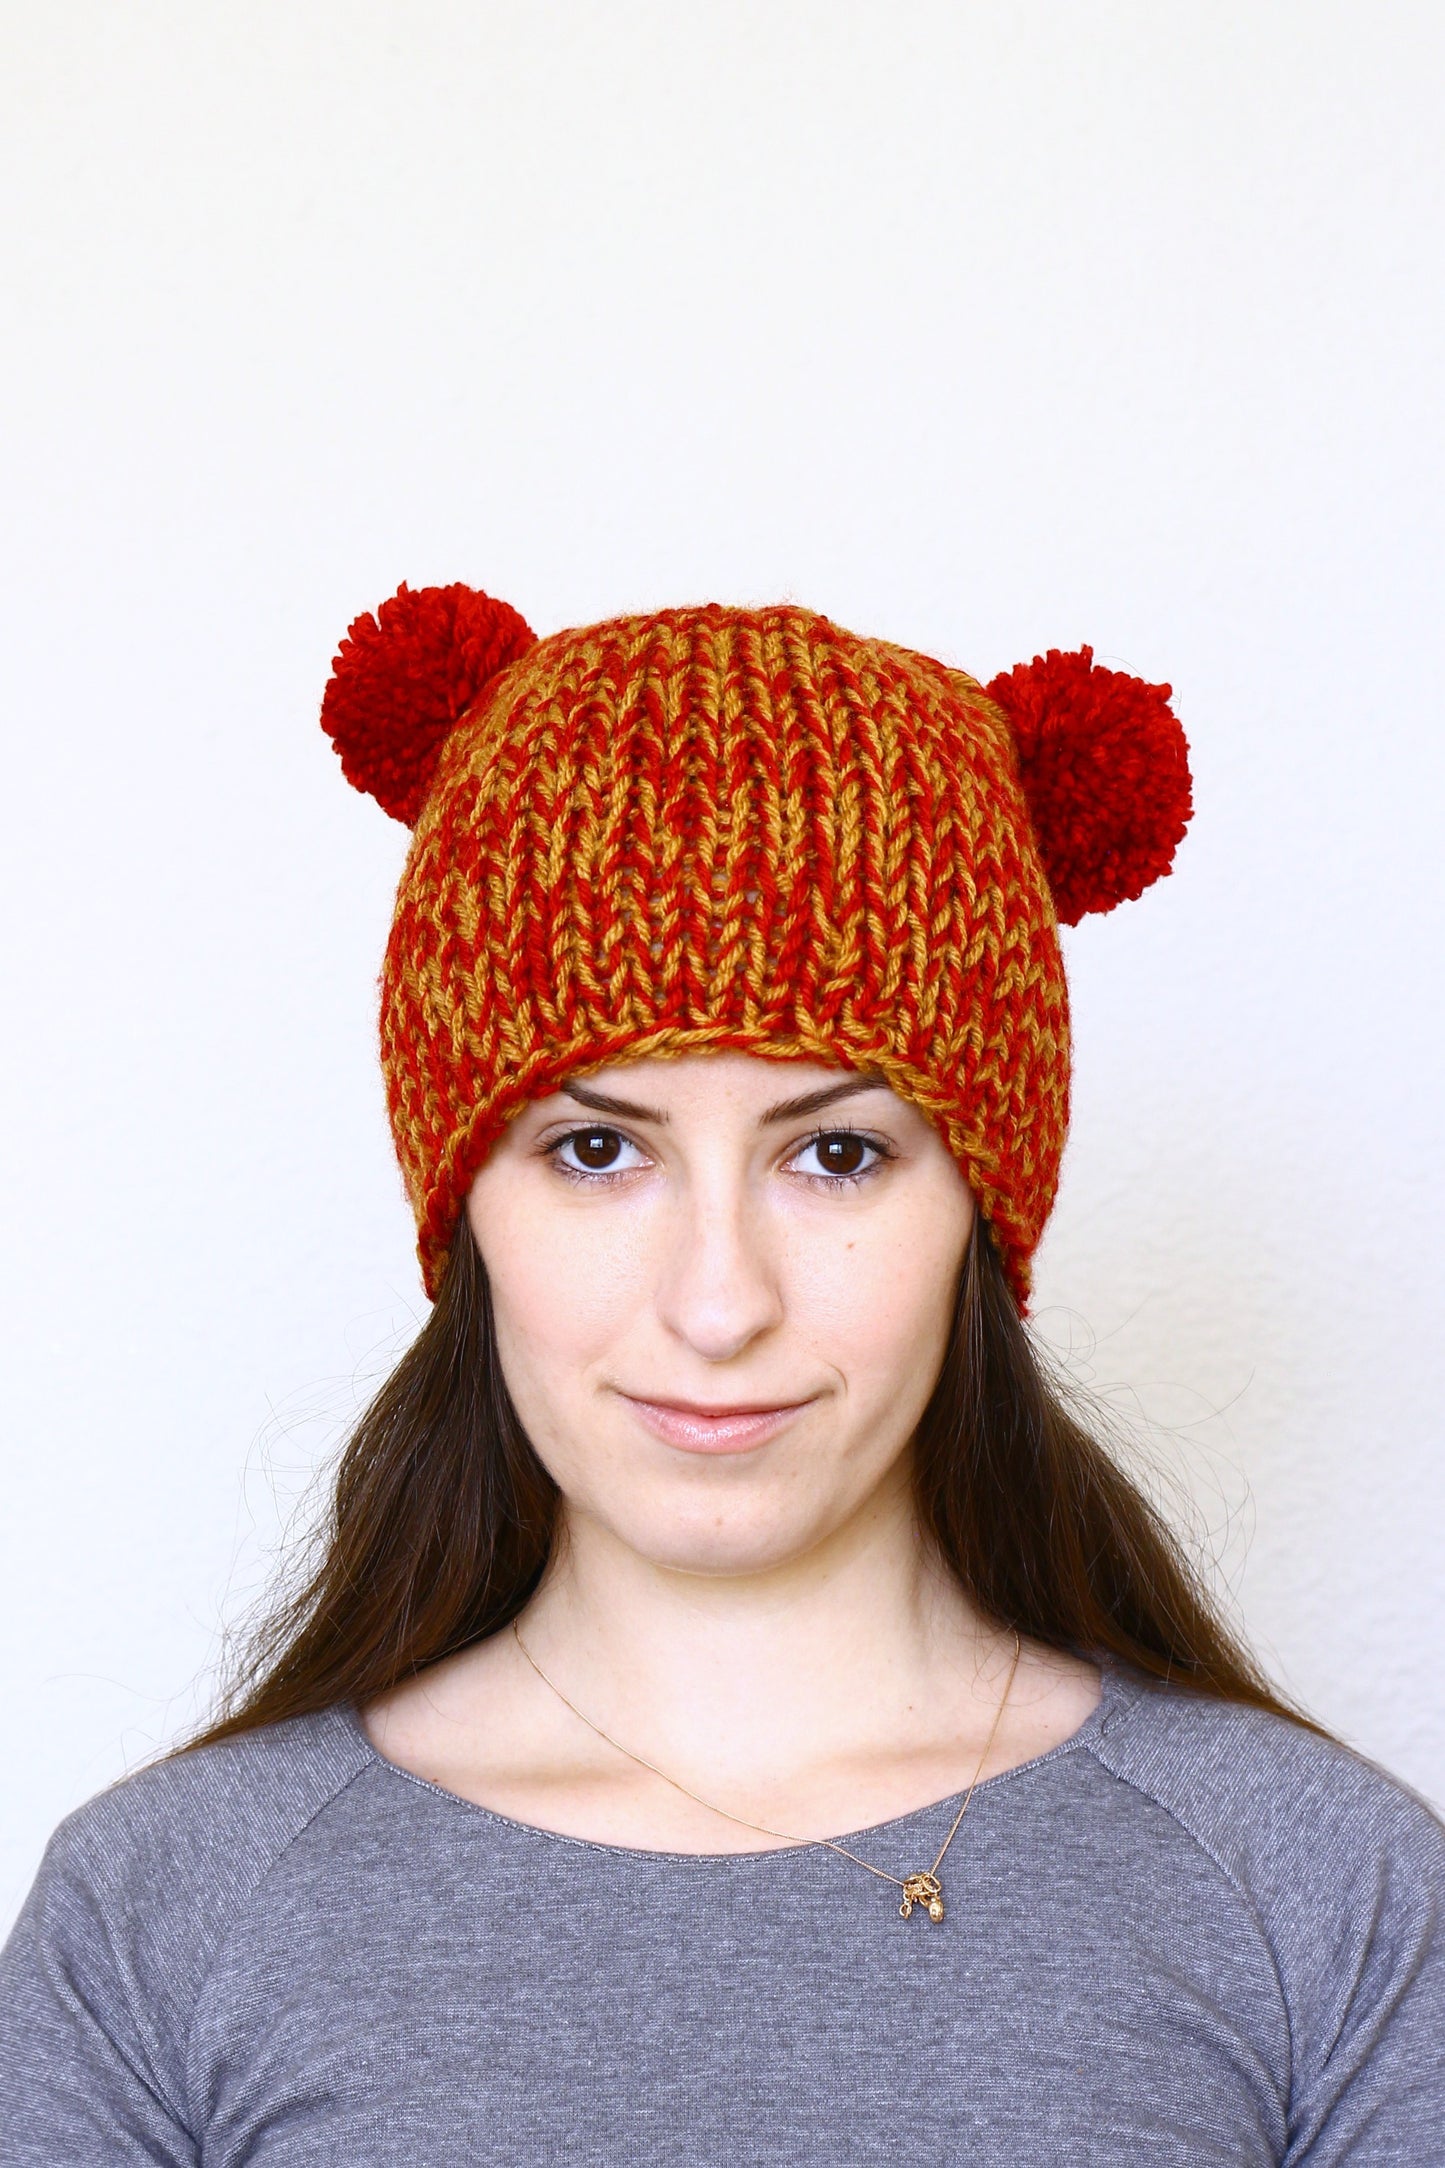 Knit hat with two poms, knit skull hat in red orange color